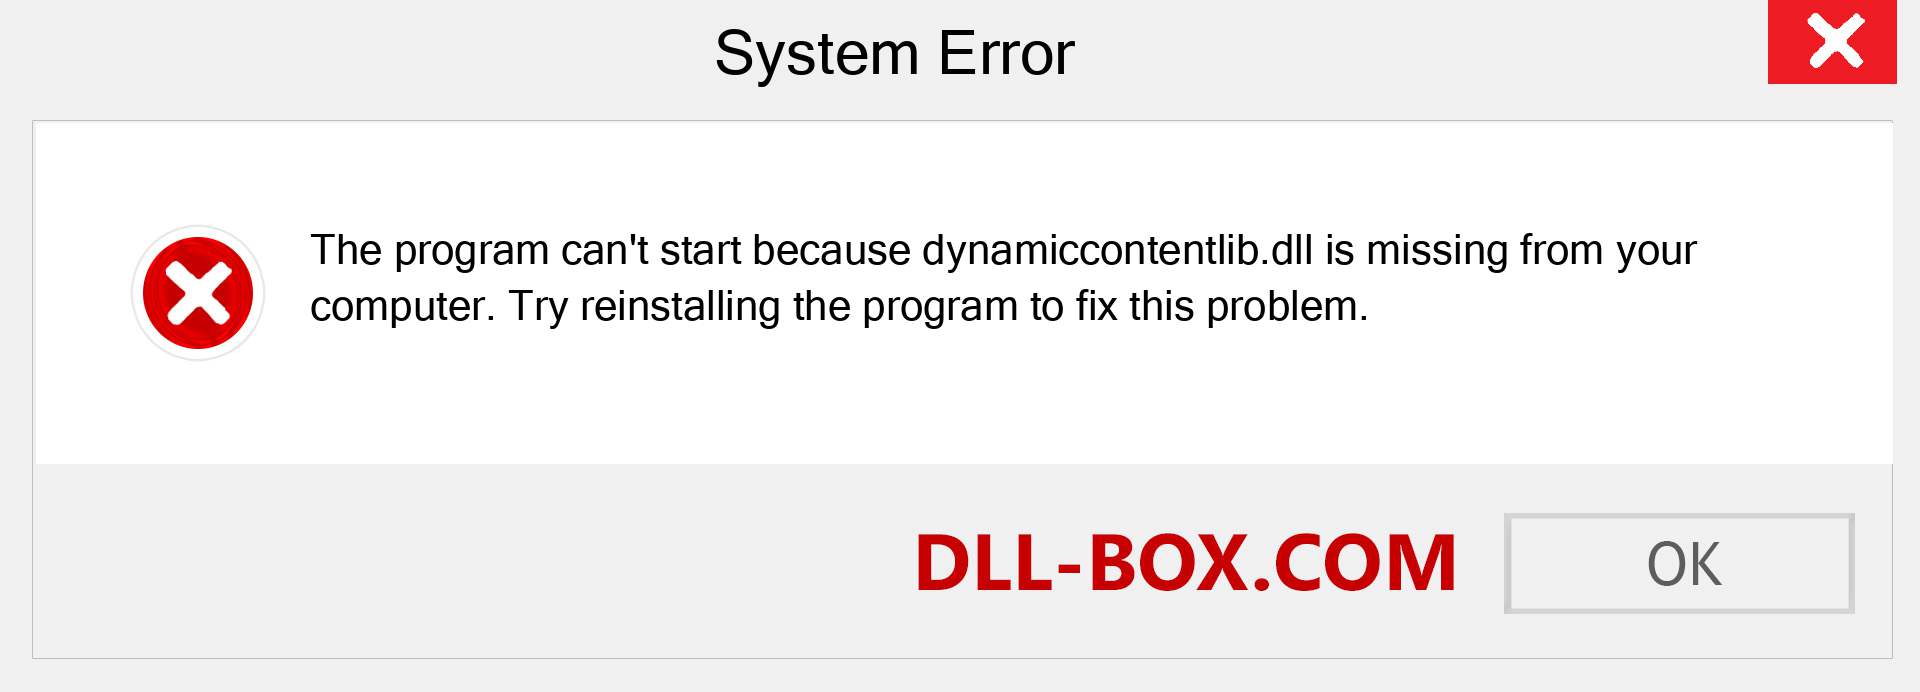  dynamiccontentlib.dll file is missing?. Download for Windows 7, 8, 10 - Fix  dynamiccontentlib dll Missing Error on Windows, photos, images